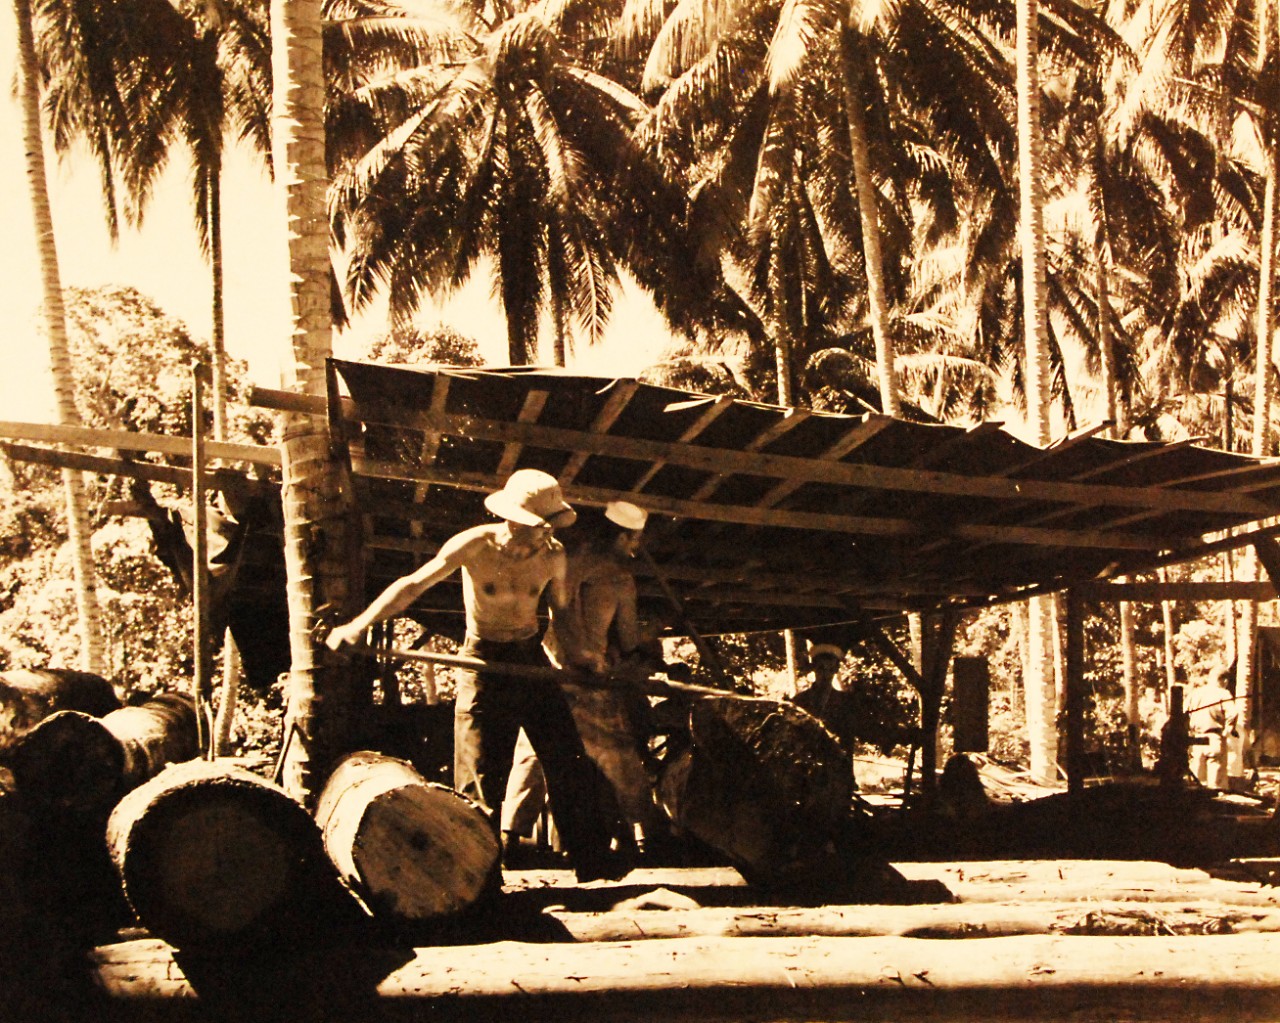 80-G-39223: Guadalcanal Campaign, August 1942-February 1943.  Navy Seabees doing construction work at Guadalcanal, working in the sawmill moving logs, January 30, 1943.   Official U.S. Navy photograph, now in the collections of the National Archives.  (2016/12/06).